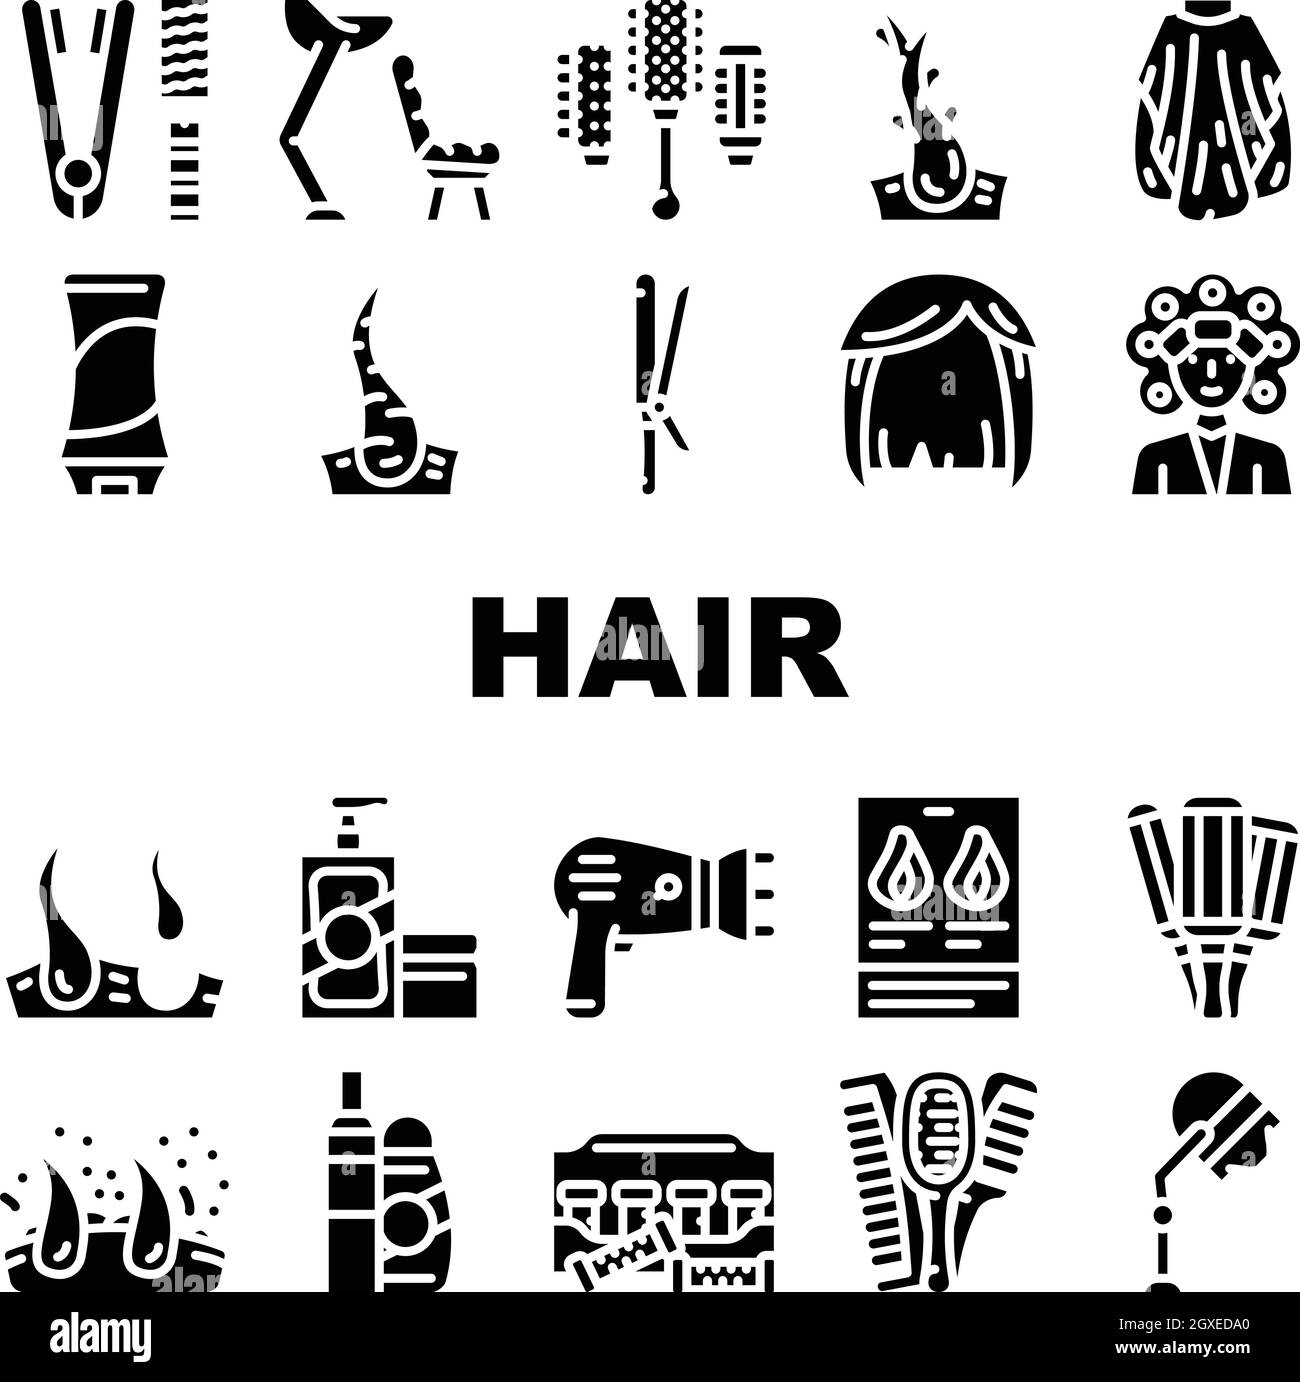 Healthy Hair Treatment Collection Icons Set Vector Stock Vector